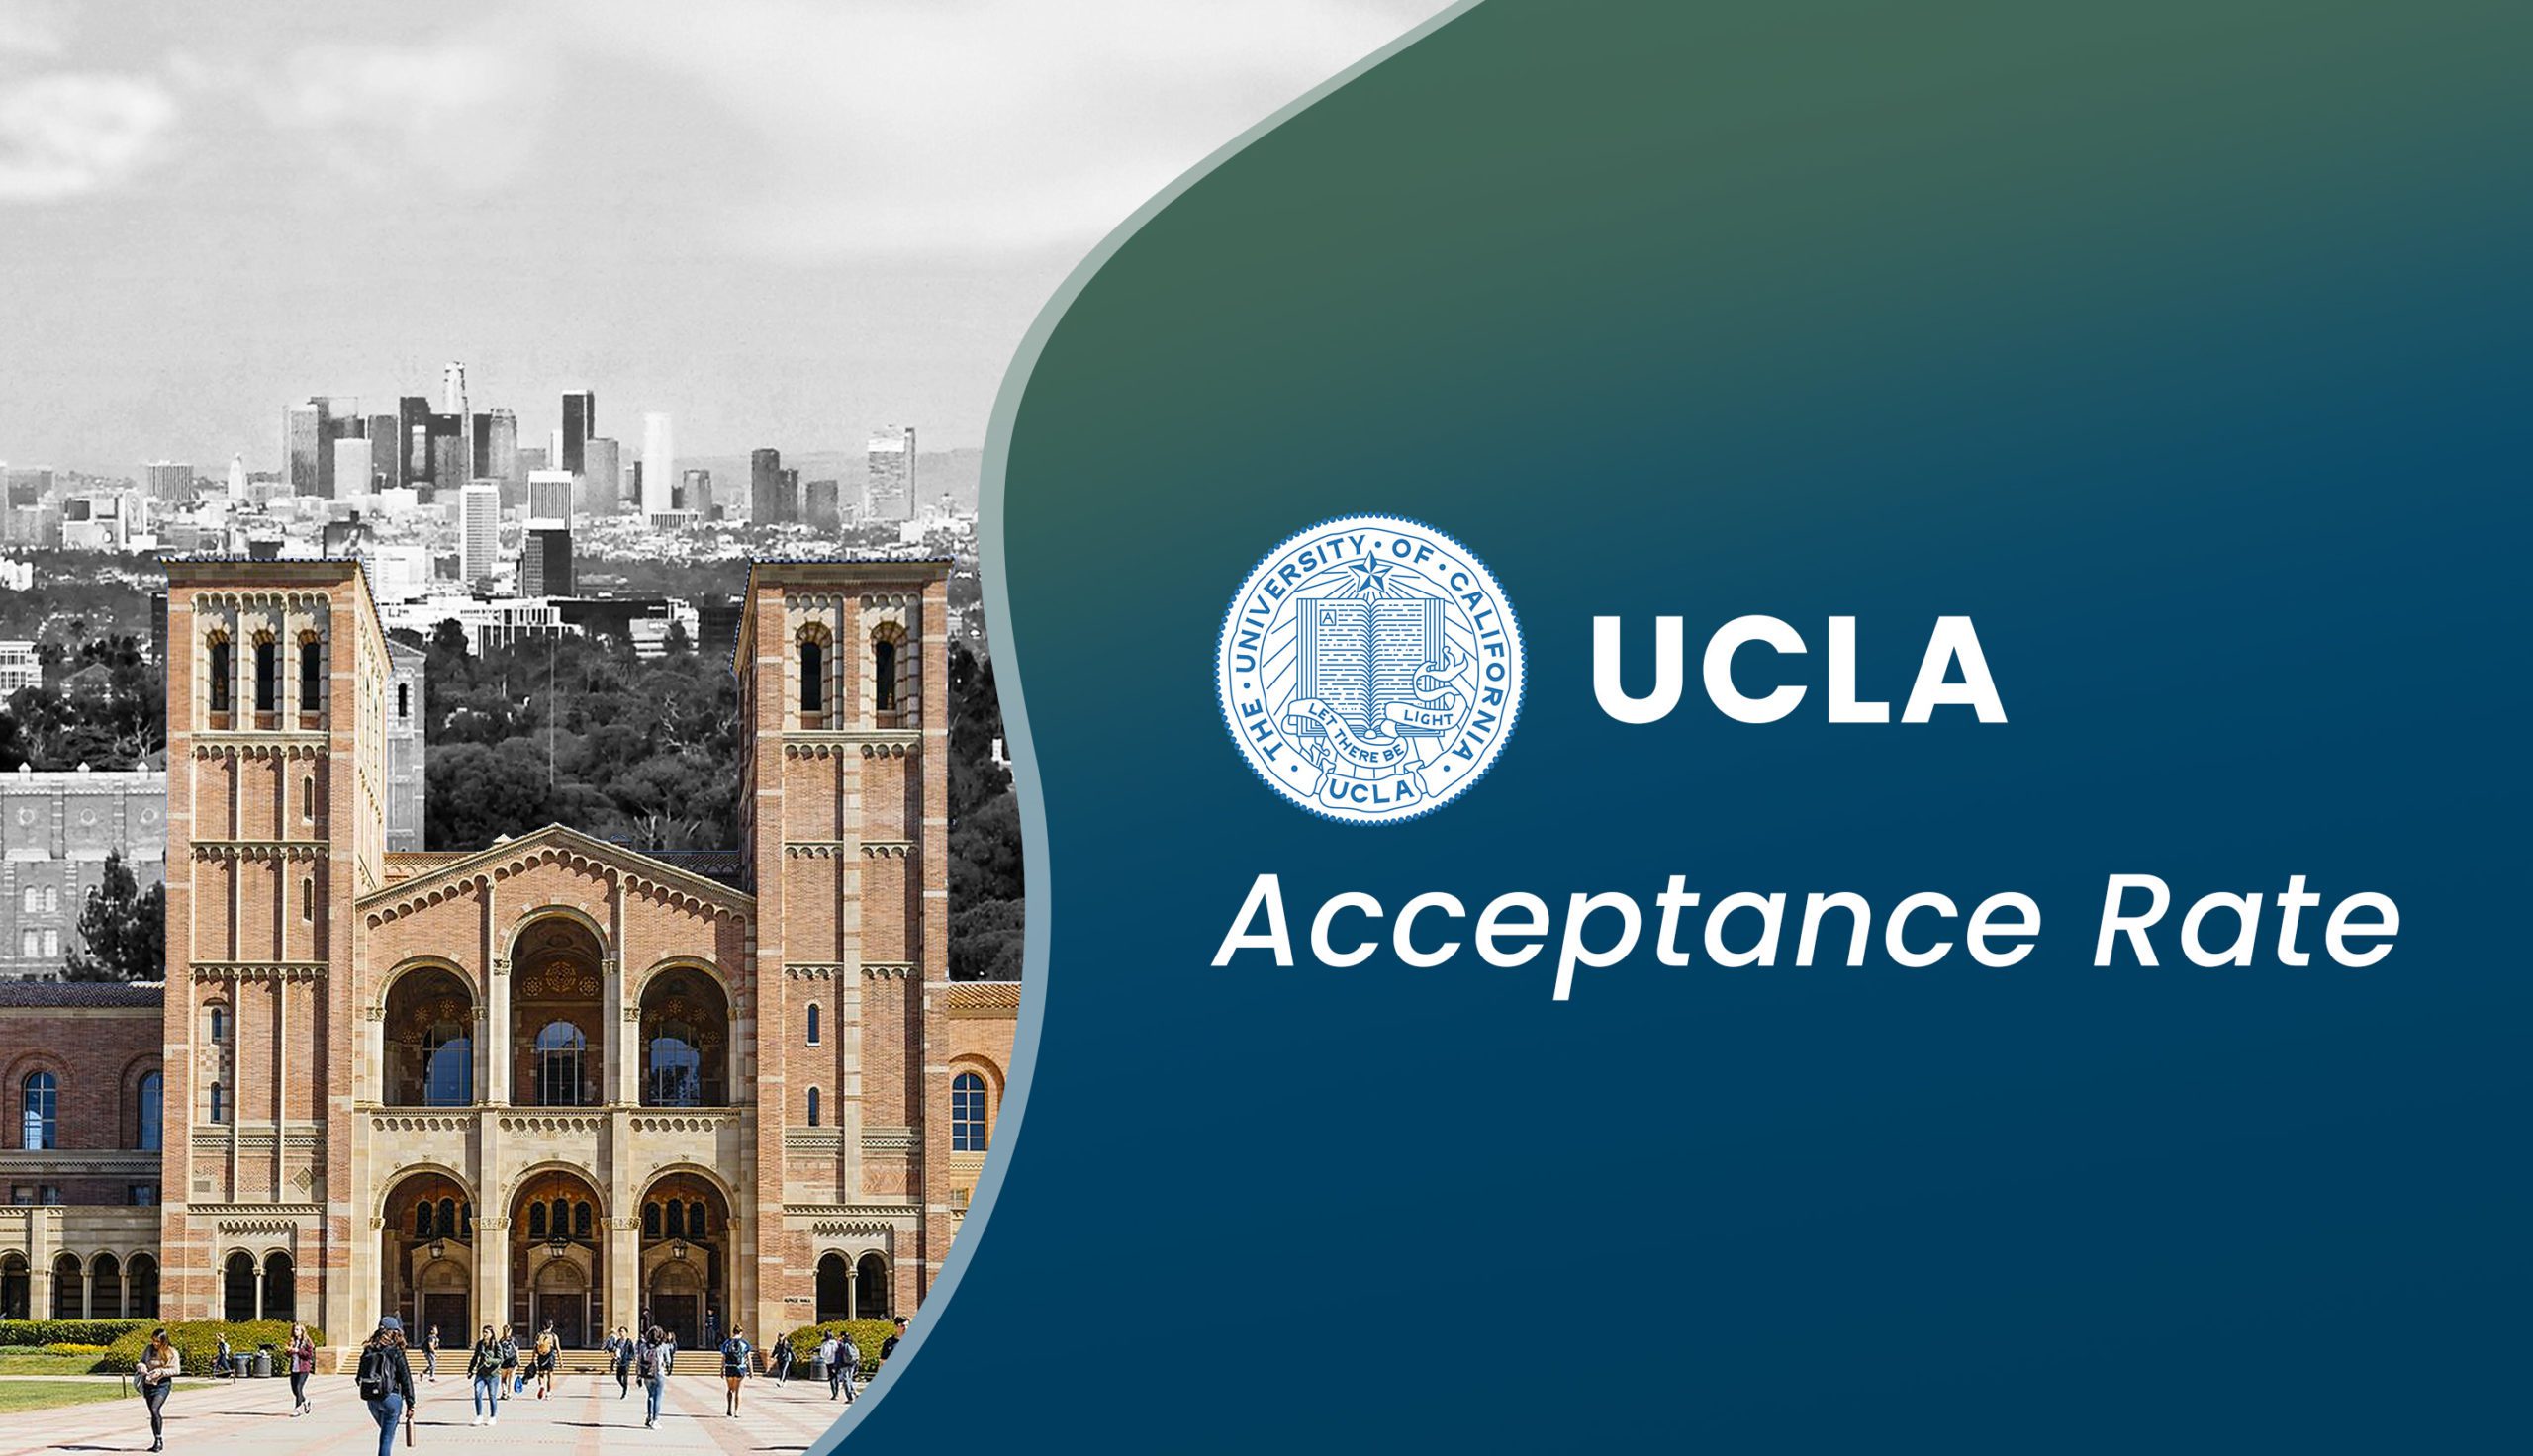 UCLA Acceptance Rate Thumb Scaled 